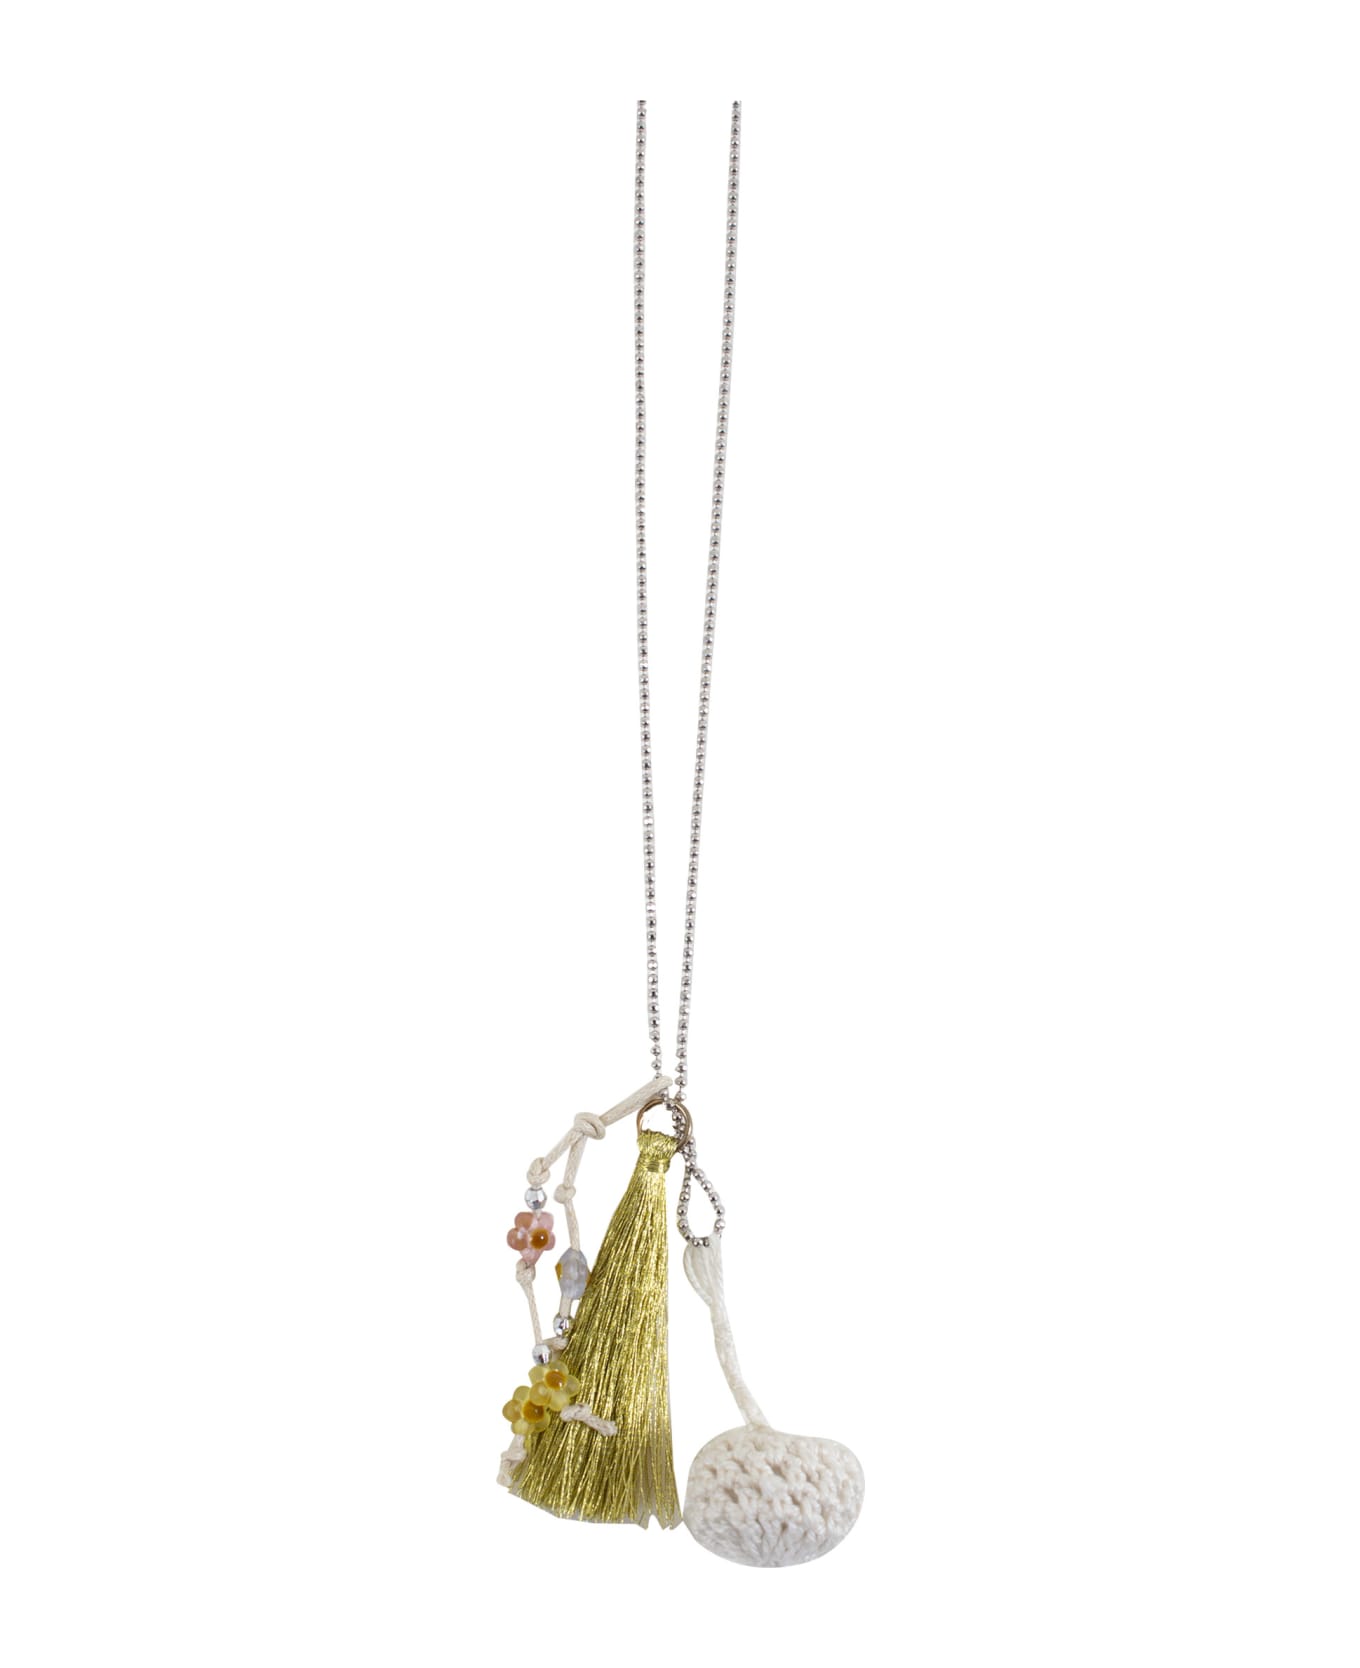 Caffe' d'Orzo Necklace With Tassels - White